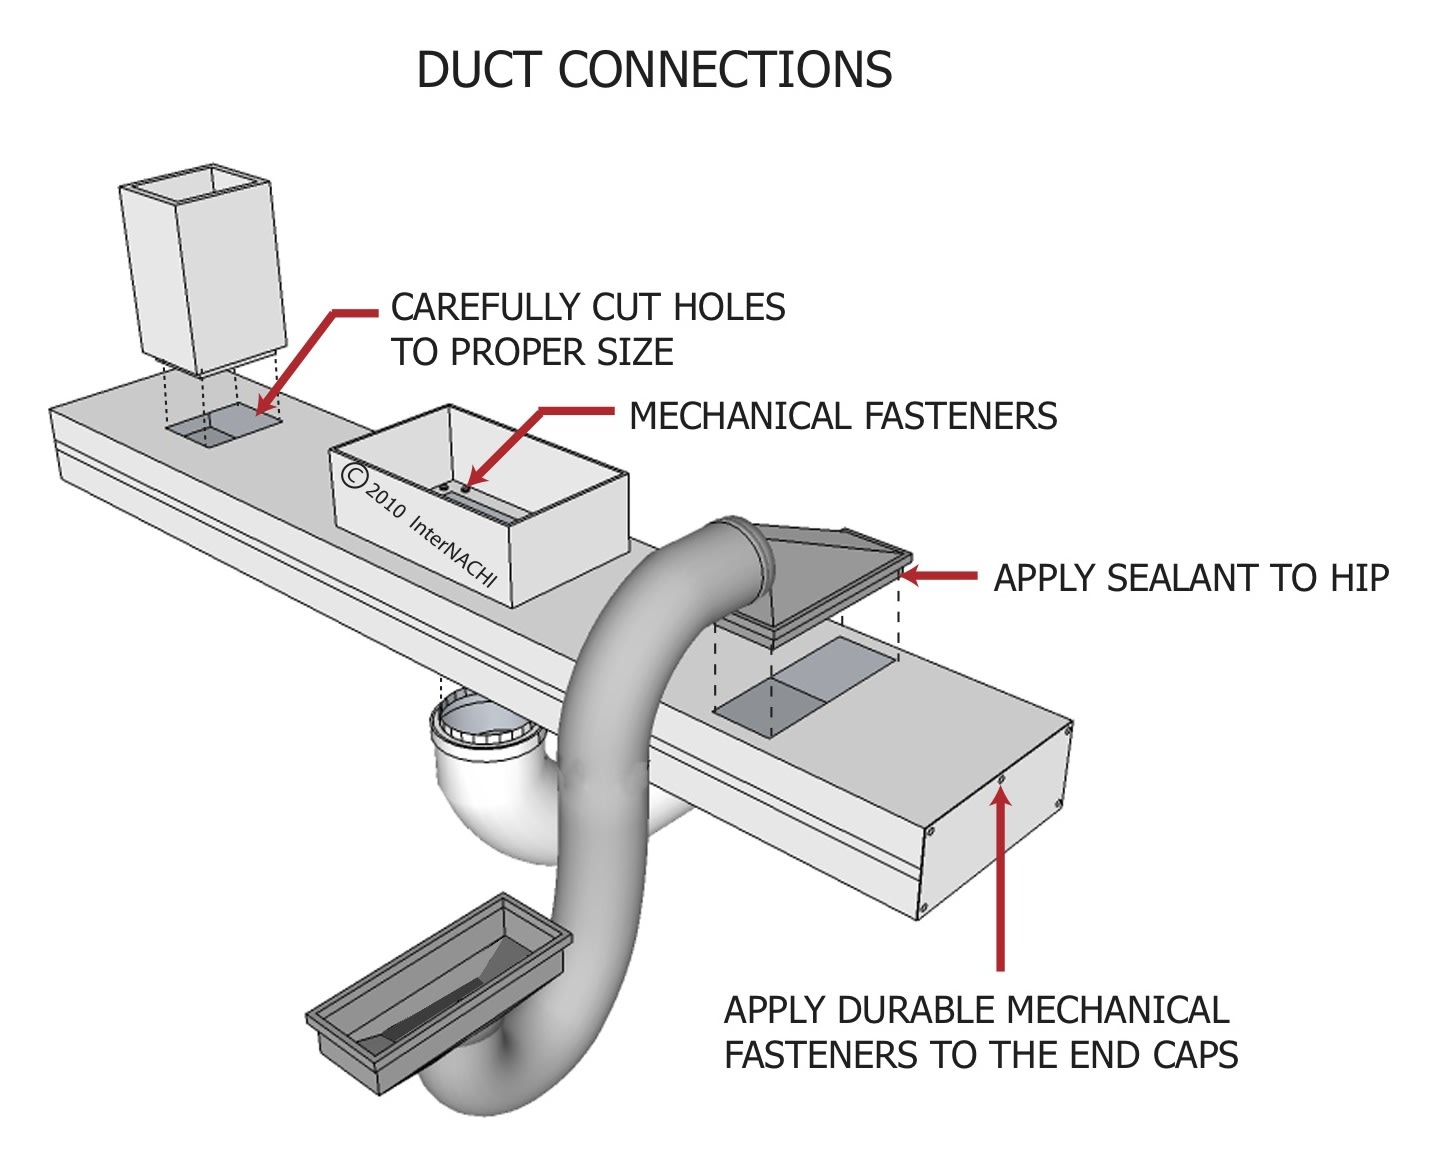 Duct connections.